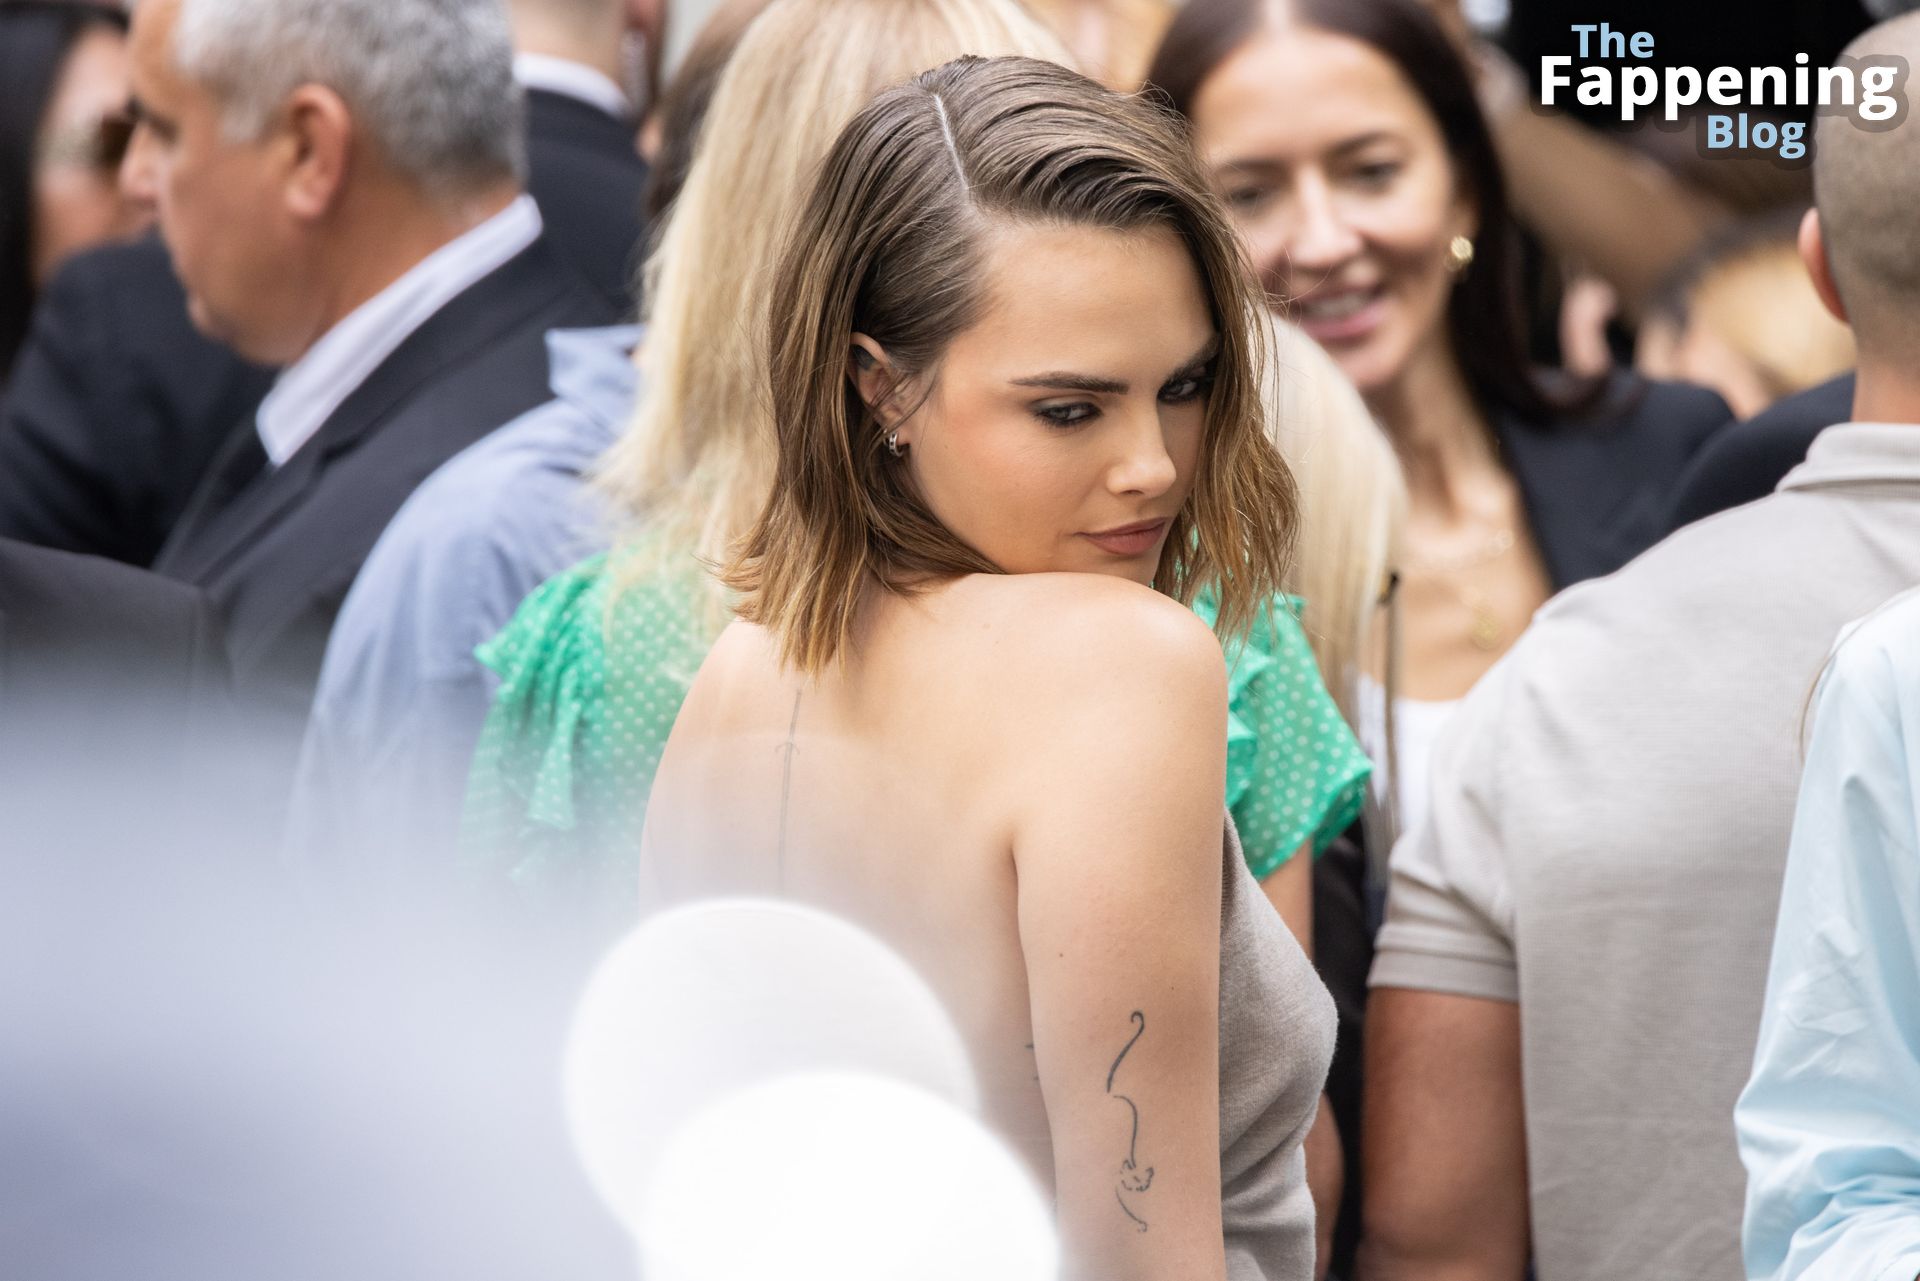 Cara-Delevingne-Sexy-64-The-Fappening-Blog.jpg